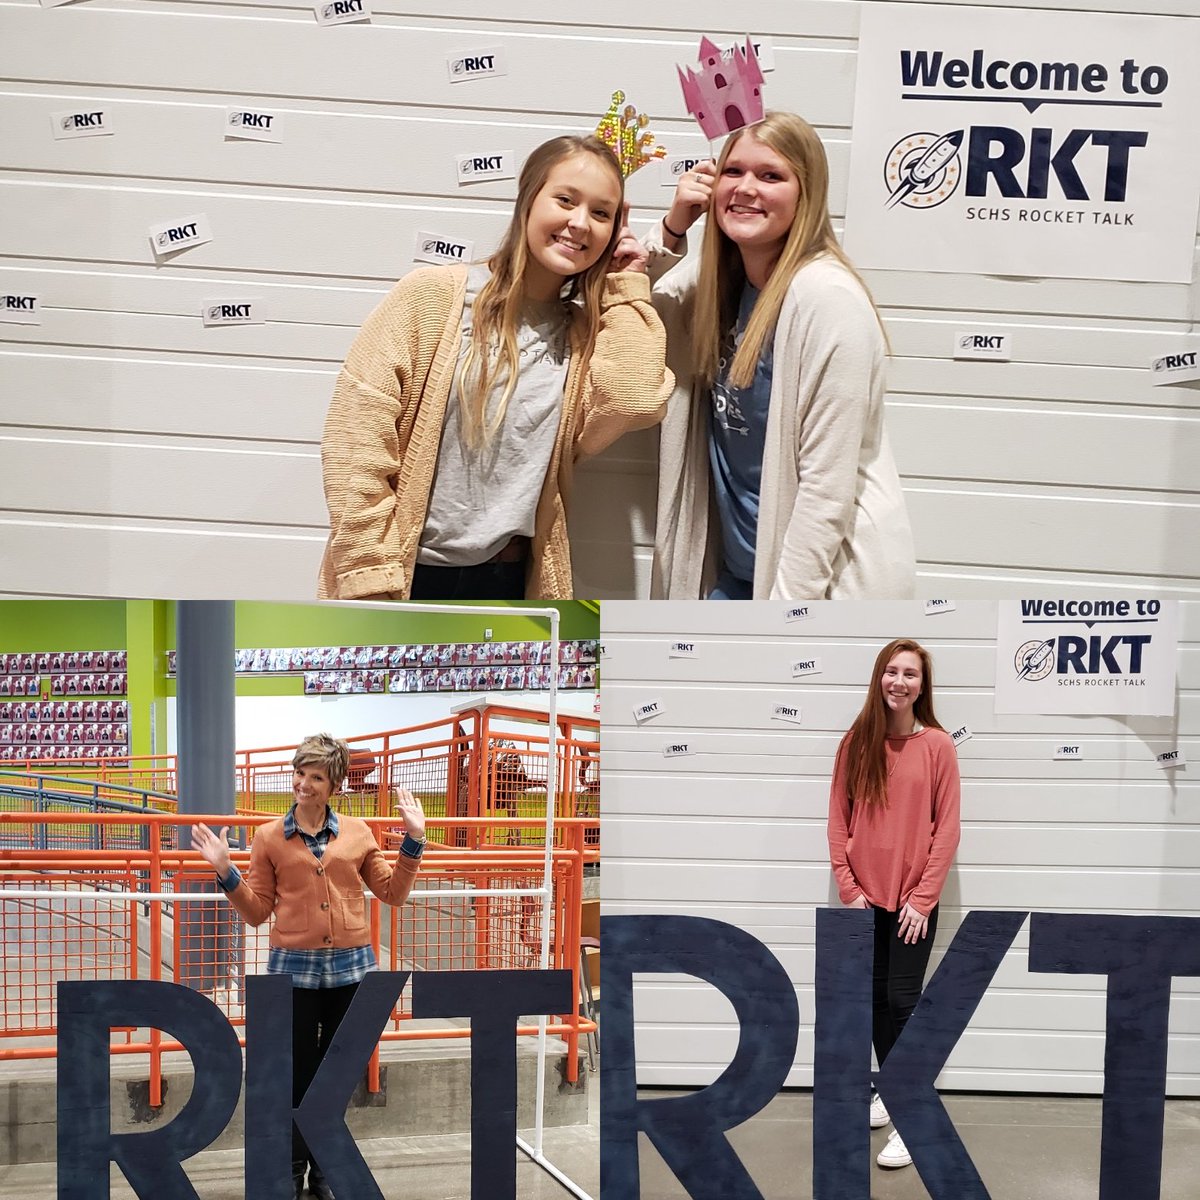 SCHS RKT Talks were a success. I'm so proud of our students for growing their learning. So thankful to all students, parents, and community members for being our #AuthenticAudience. @RocketPrincipal @RocketLibrary @MrsRamirez203